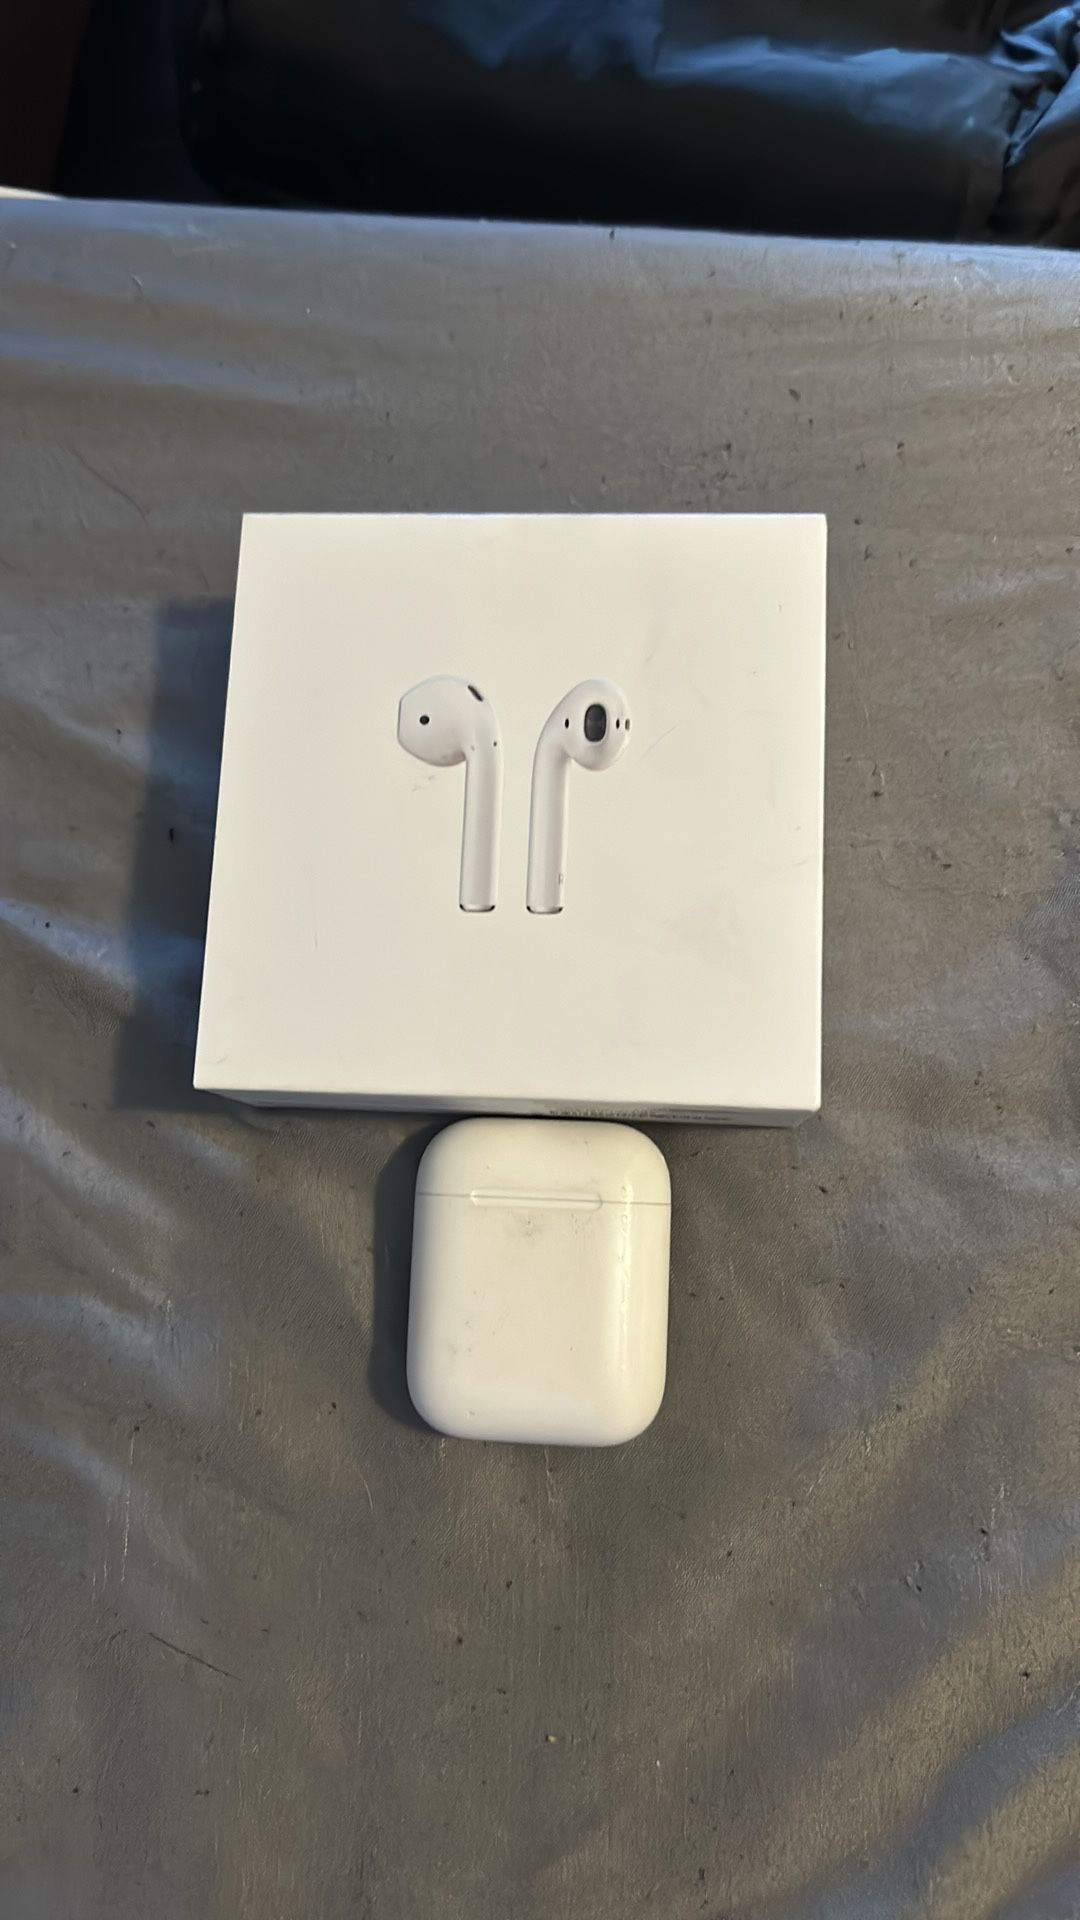 Apple AirPods, 1st Generation